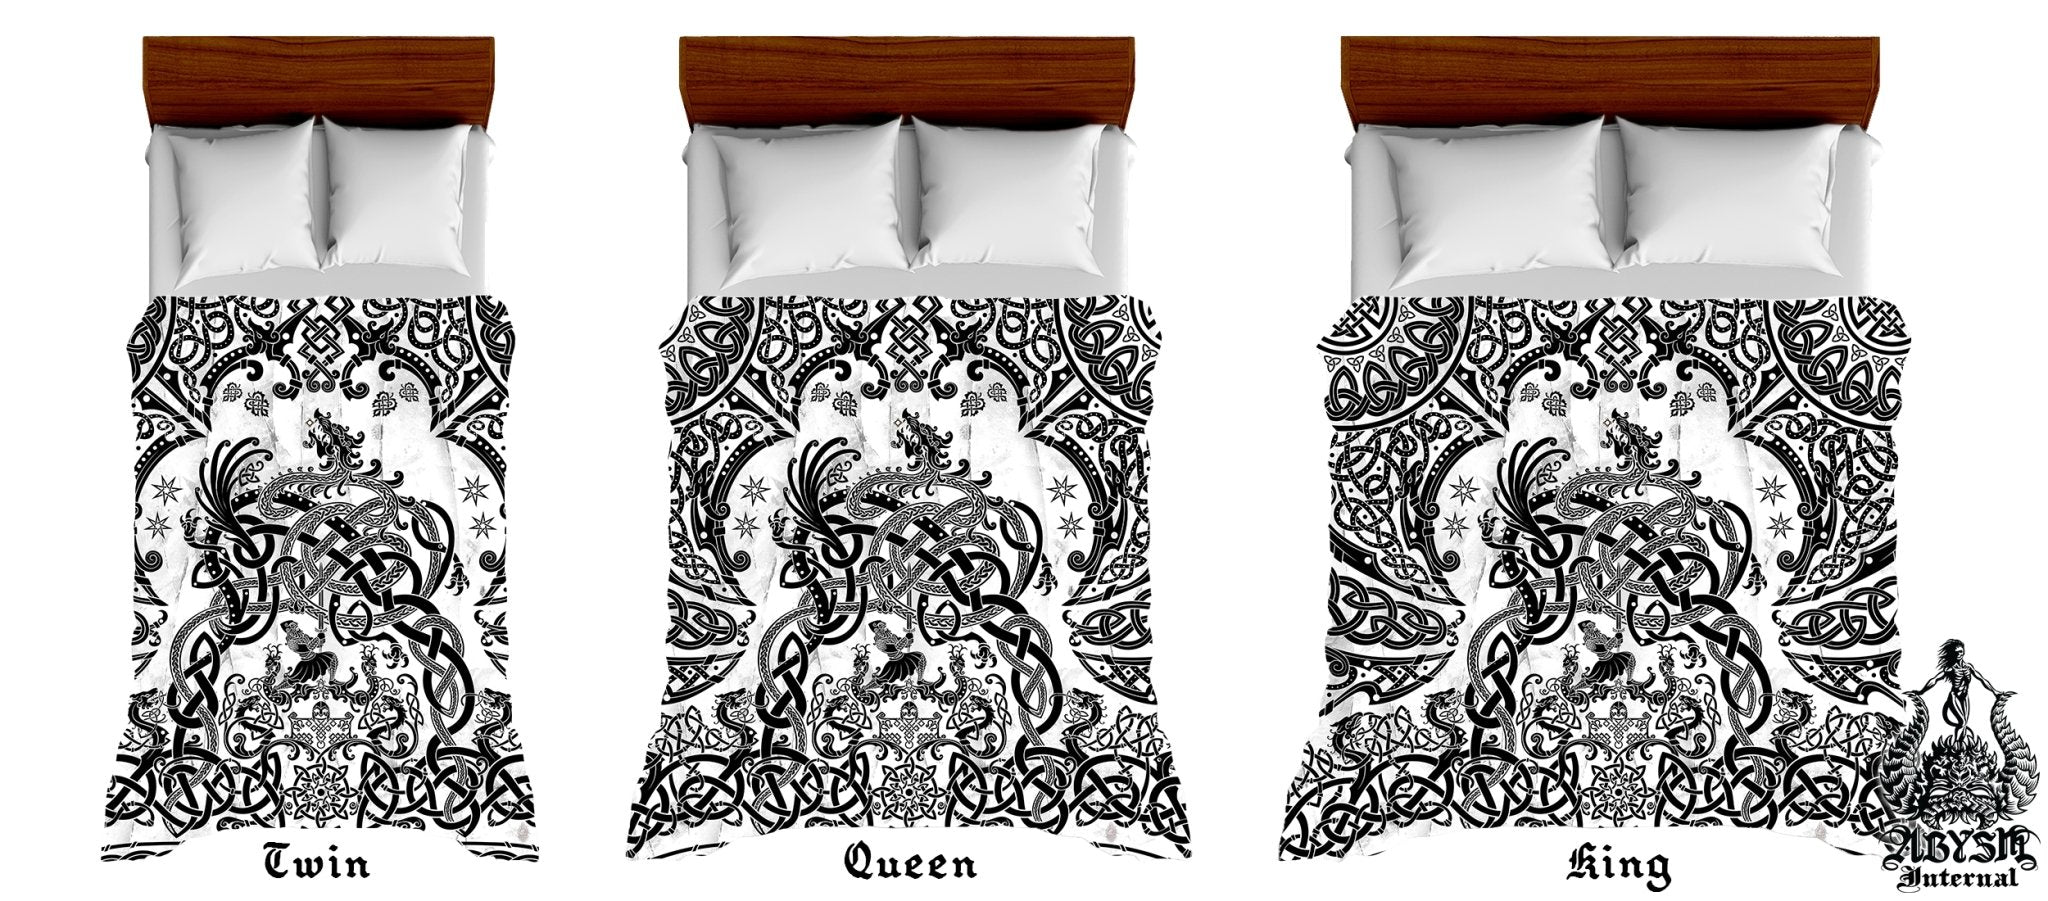 Viking Bedding Set, Comforter and Duvet, Norse Bed Cover and Bedroom Decor, Nordic Art, Sigurd kills Dragon Fafnir, King, Queen and Twin Size - Black & White - Abysm Internal